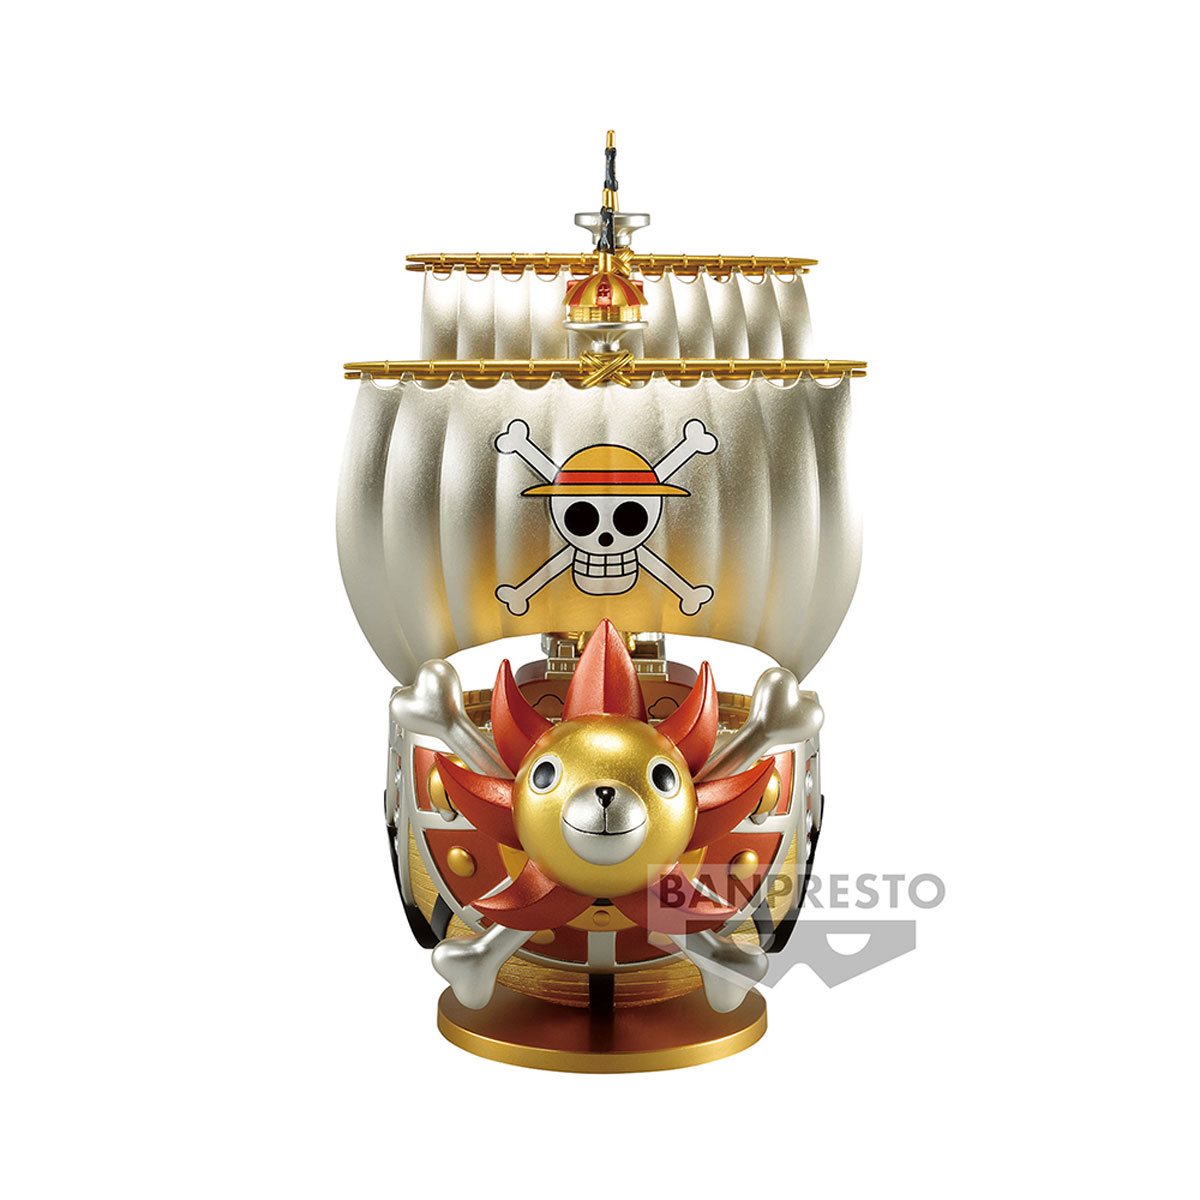 How Much Would You Pay for a Solid Gold One Piece Figure?